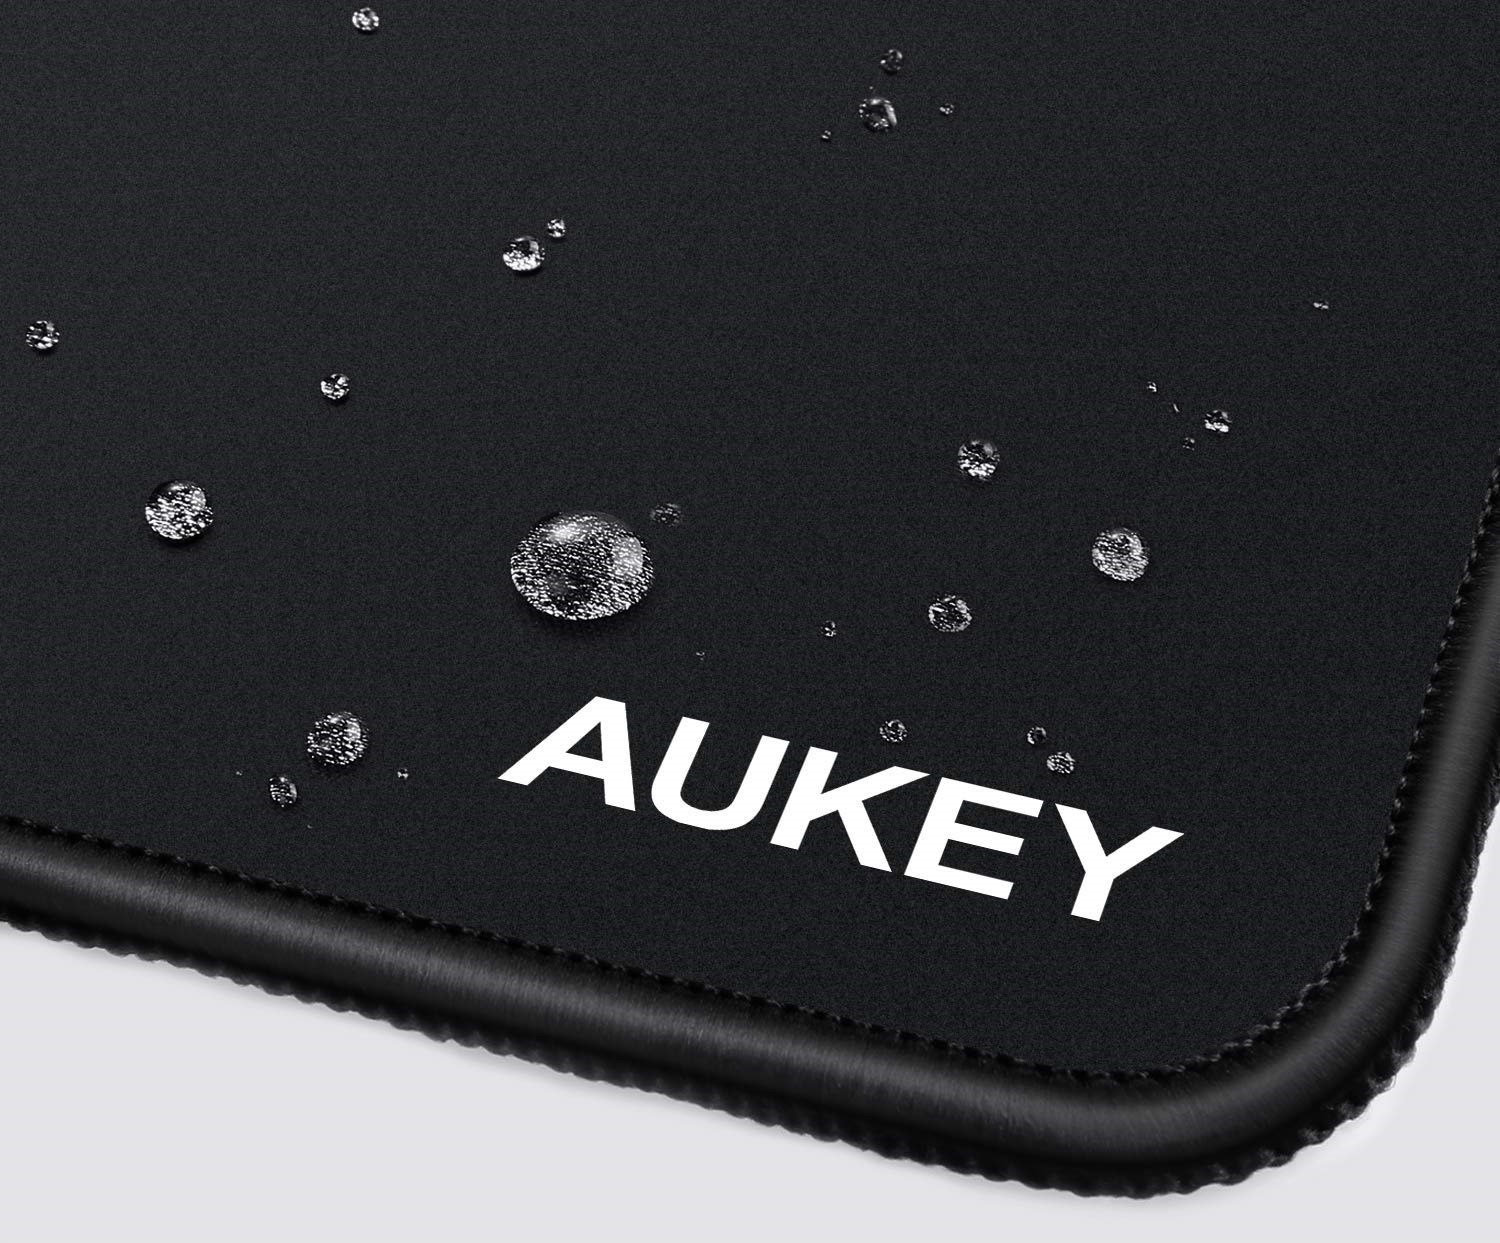 AUKEY XXL Gaming Mouse Pad Apple Tech Talk